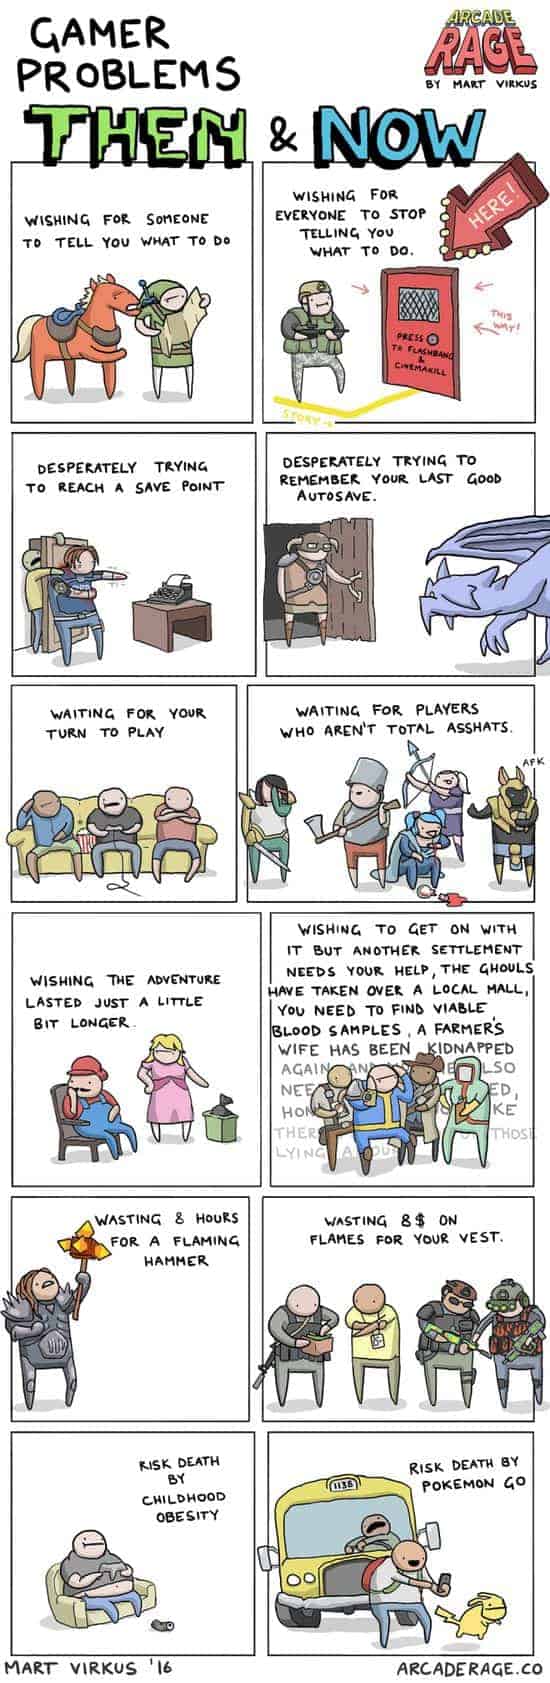 Gamer Problems Then & Now